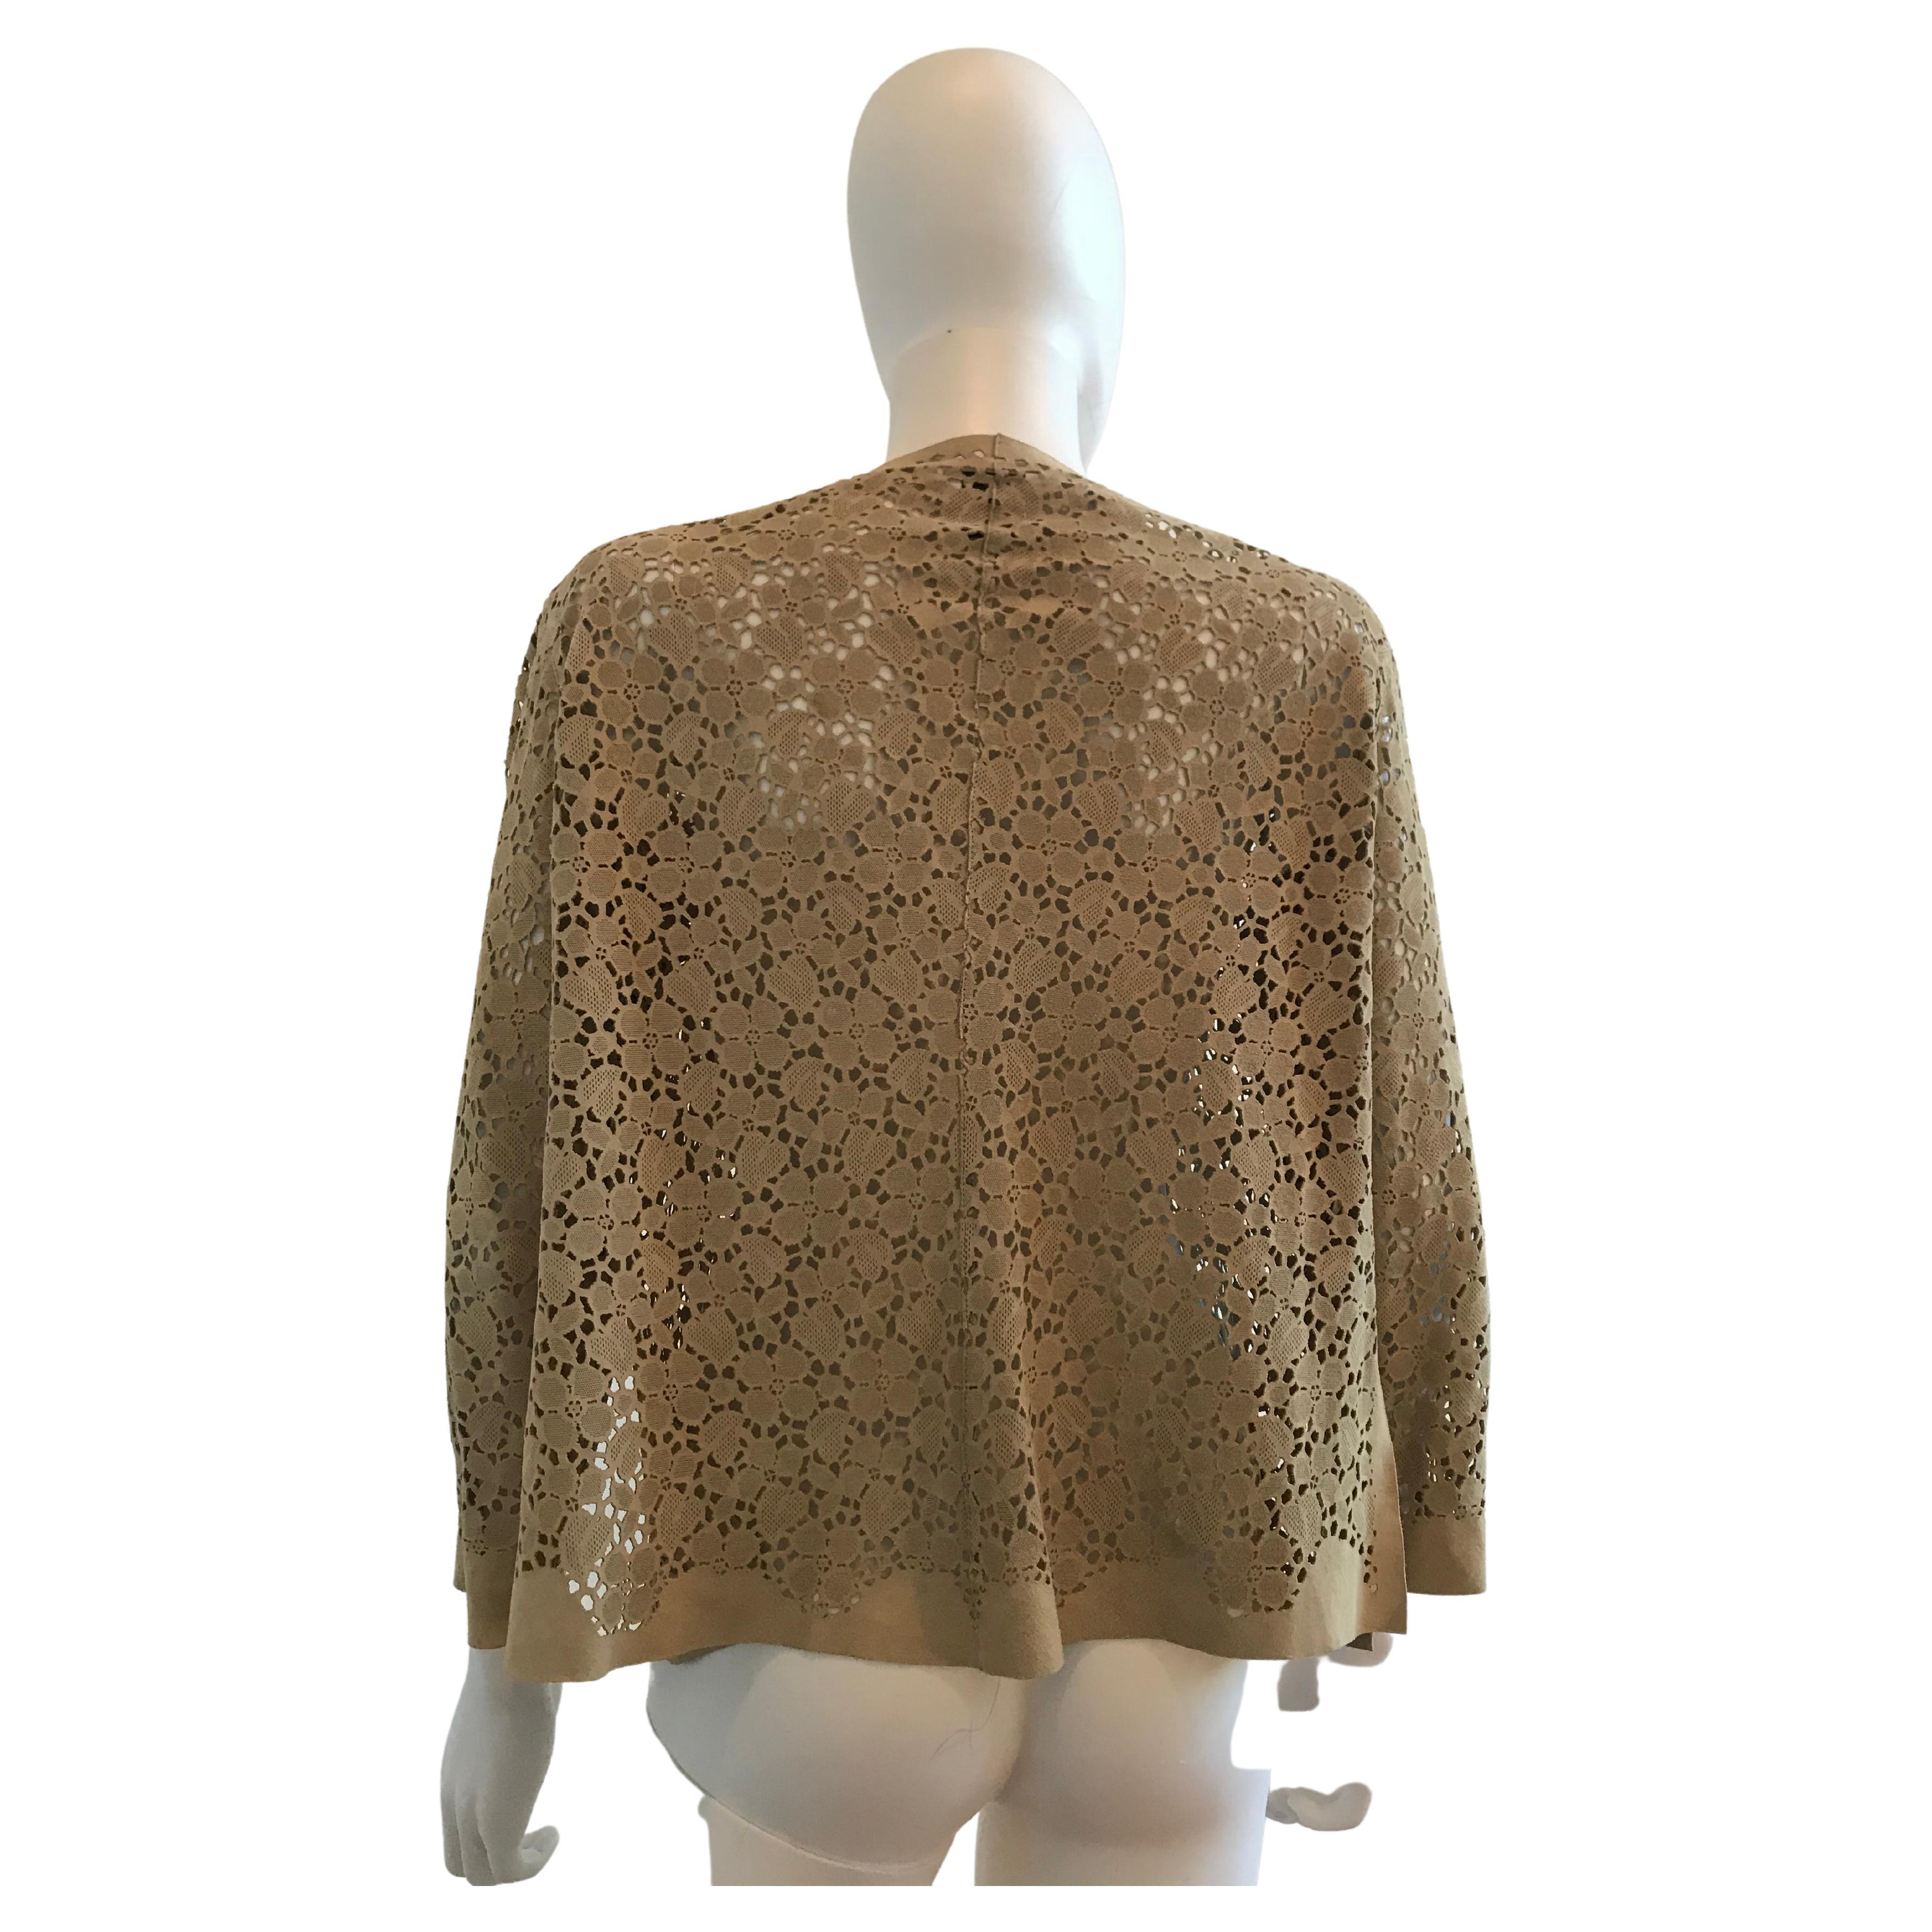 Armani Collezioni Suede Laser Cut Cardigan
Made in Italy
Size 8
Please be mindful that this piece has led a previous life, and may tell its story through minor imperfection. Purchasing this item continues its narrative, so you can be confident that